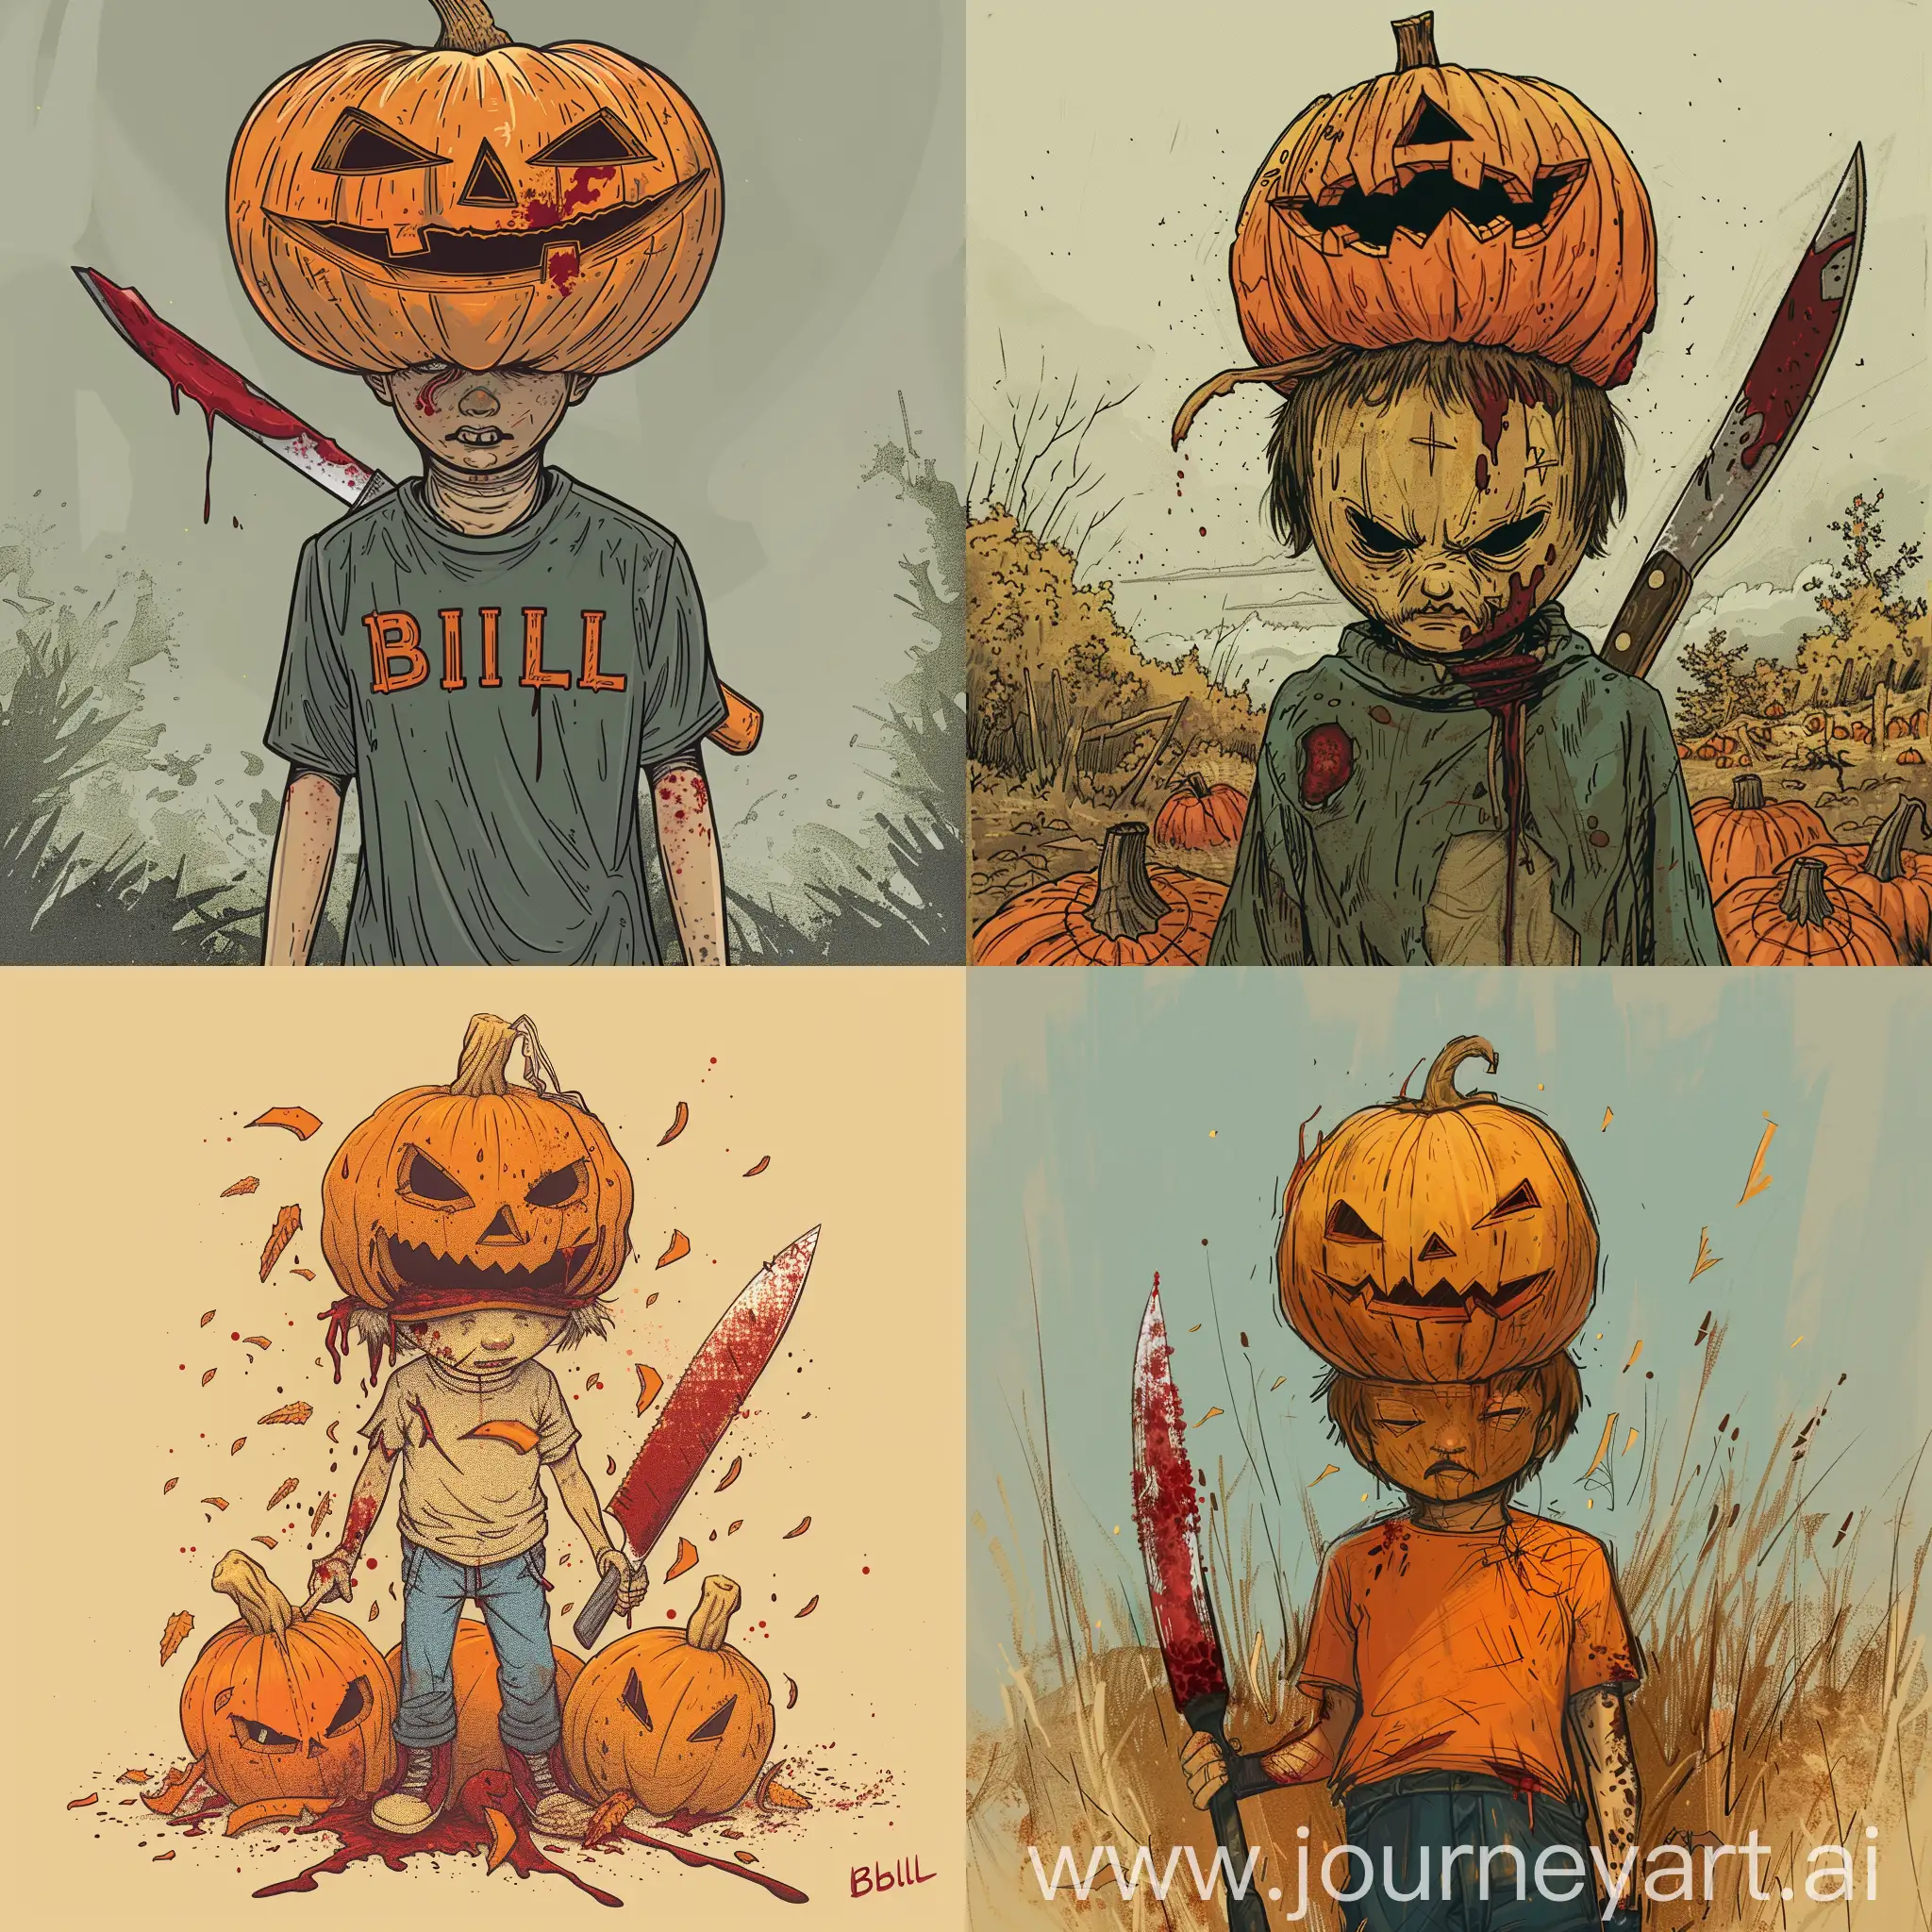 Mysterious-Guardian-of-the-Pumpkin-Patch-with-Carved-Pumpkin-and-Bloody-Knife